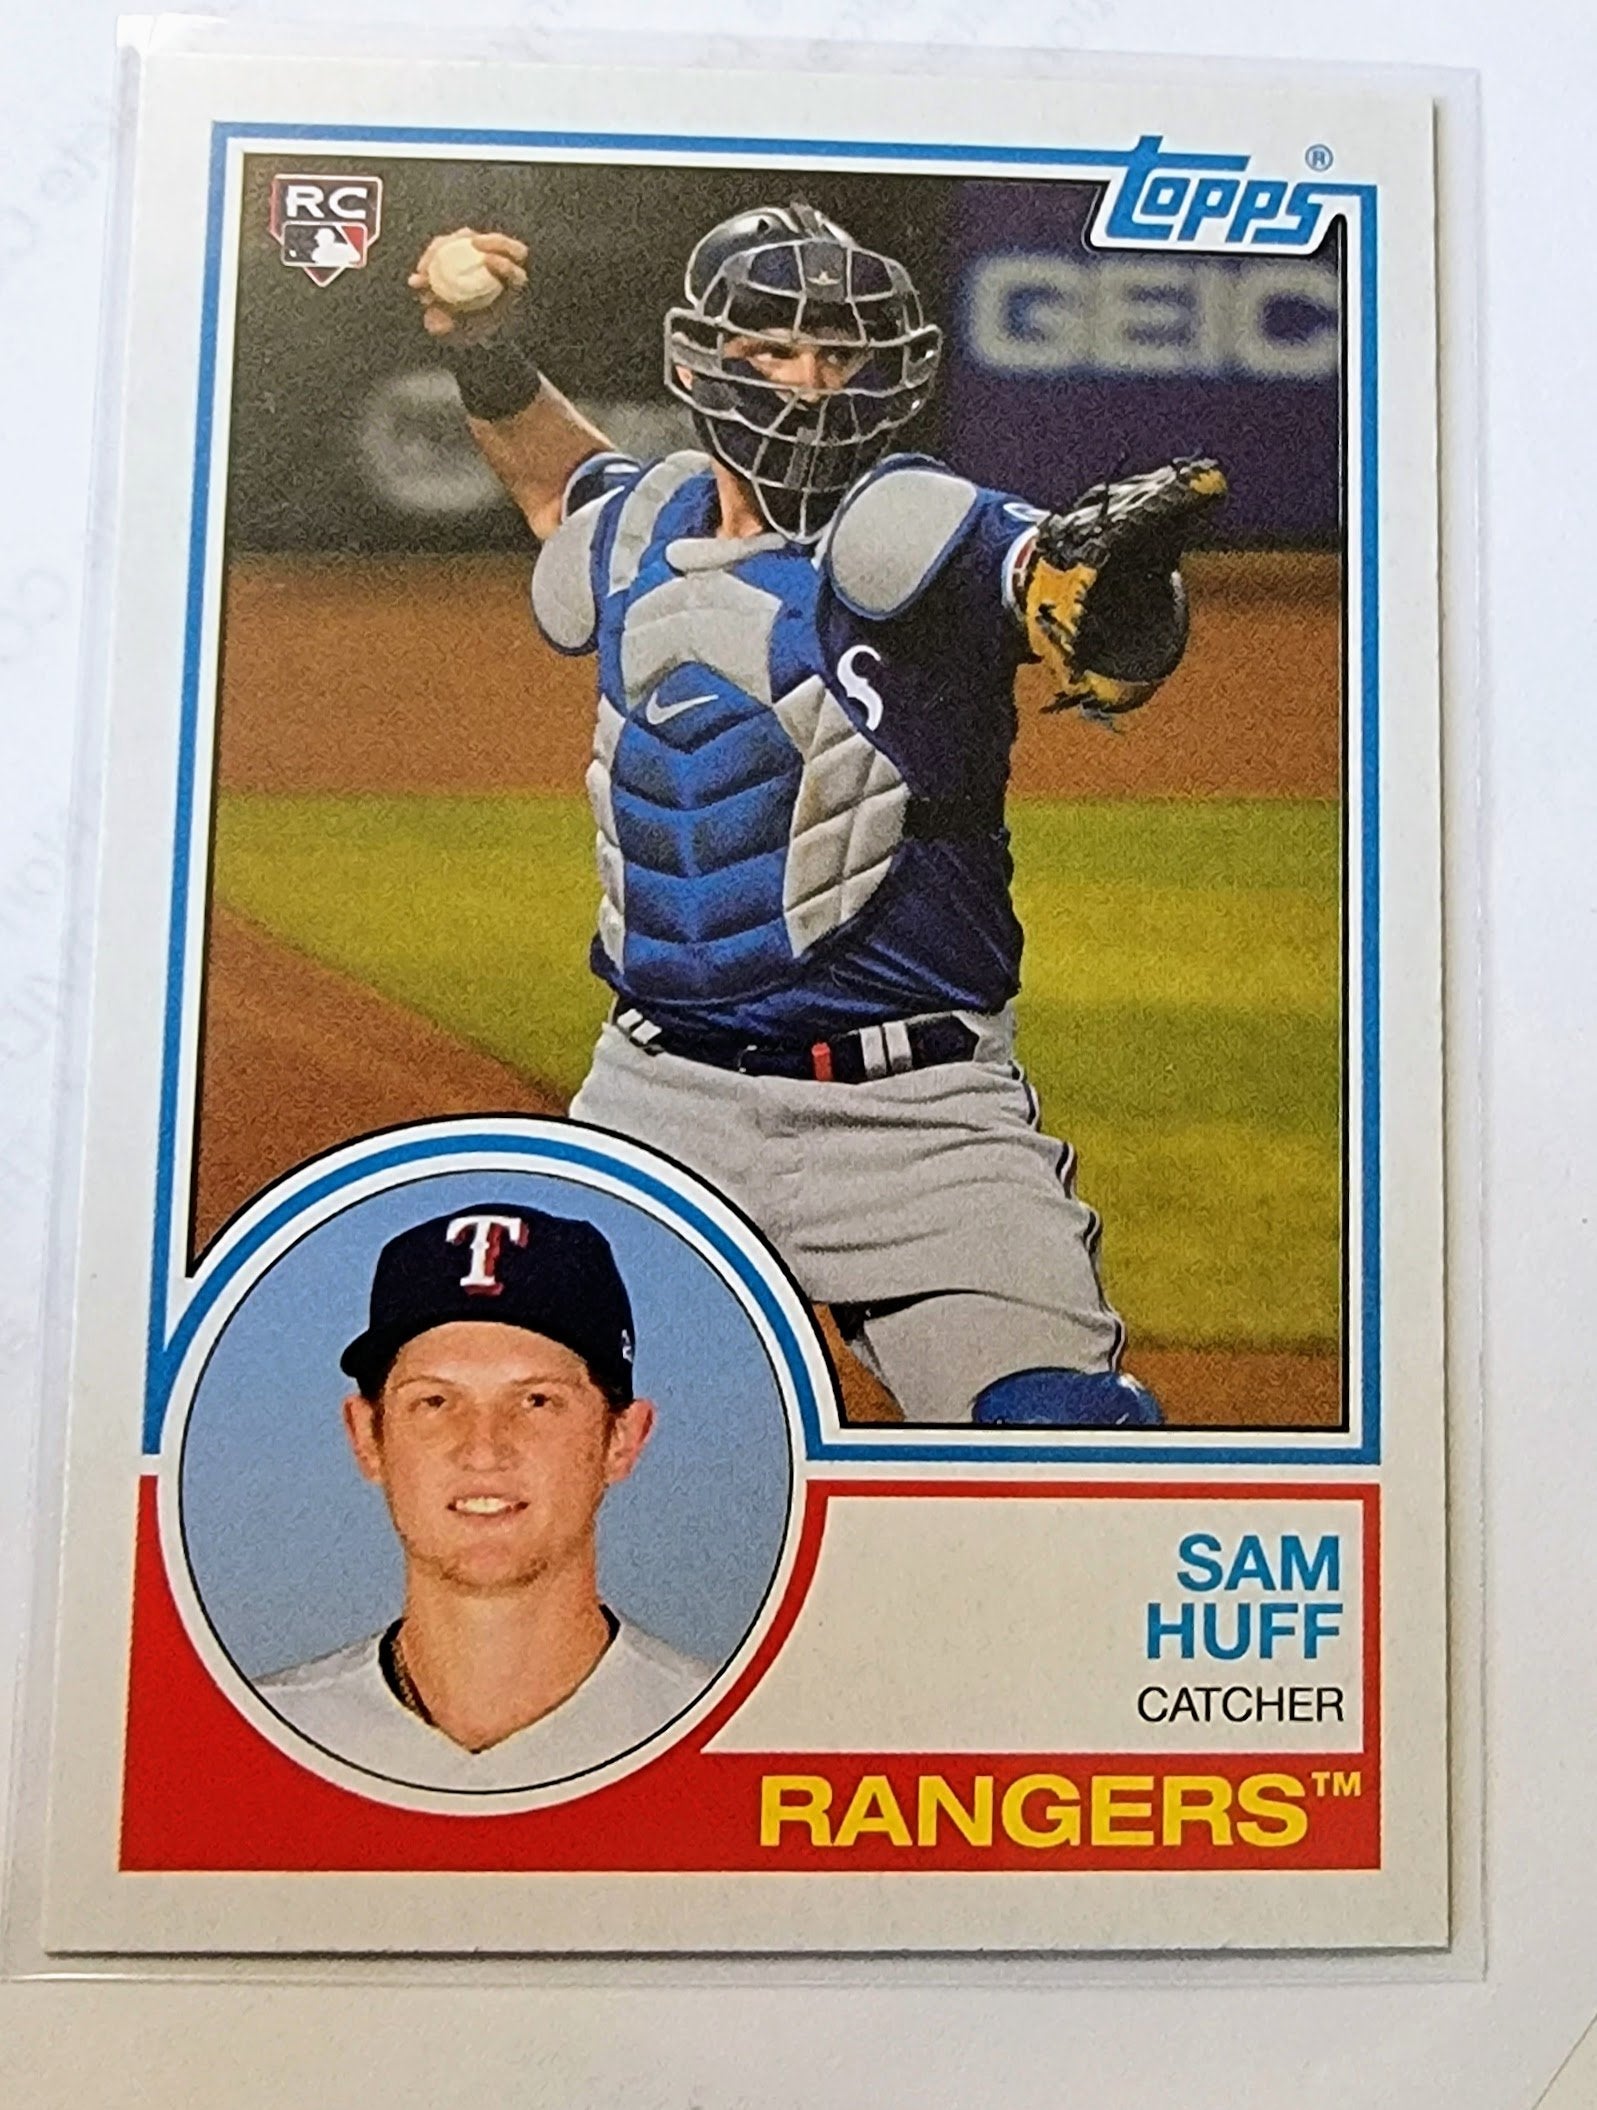 2021 Topps Archives Sam Huff 1983 Baseball Trading Card SMCB1 simple Xclusive Collectibles   